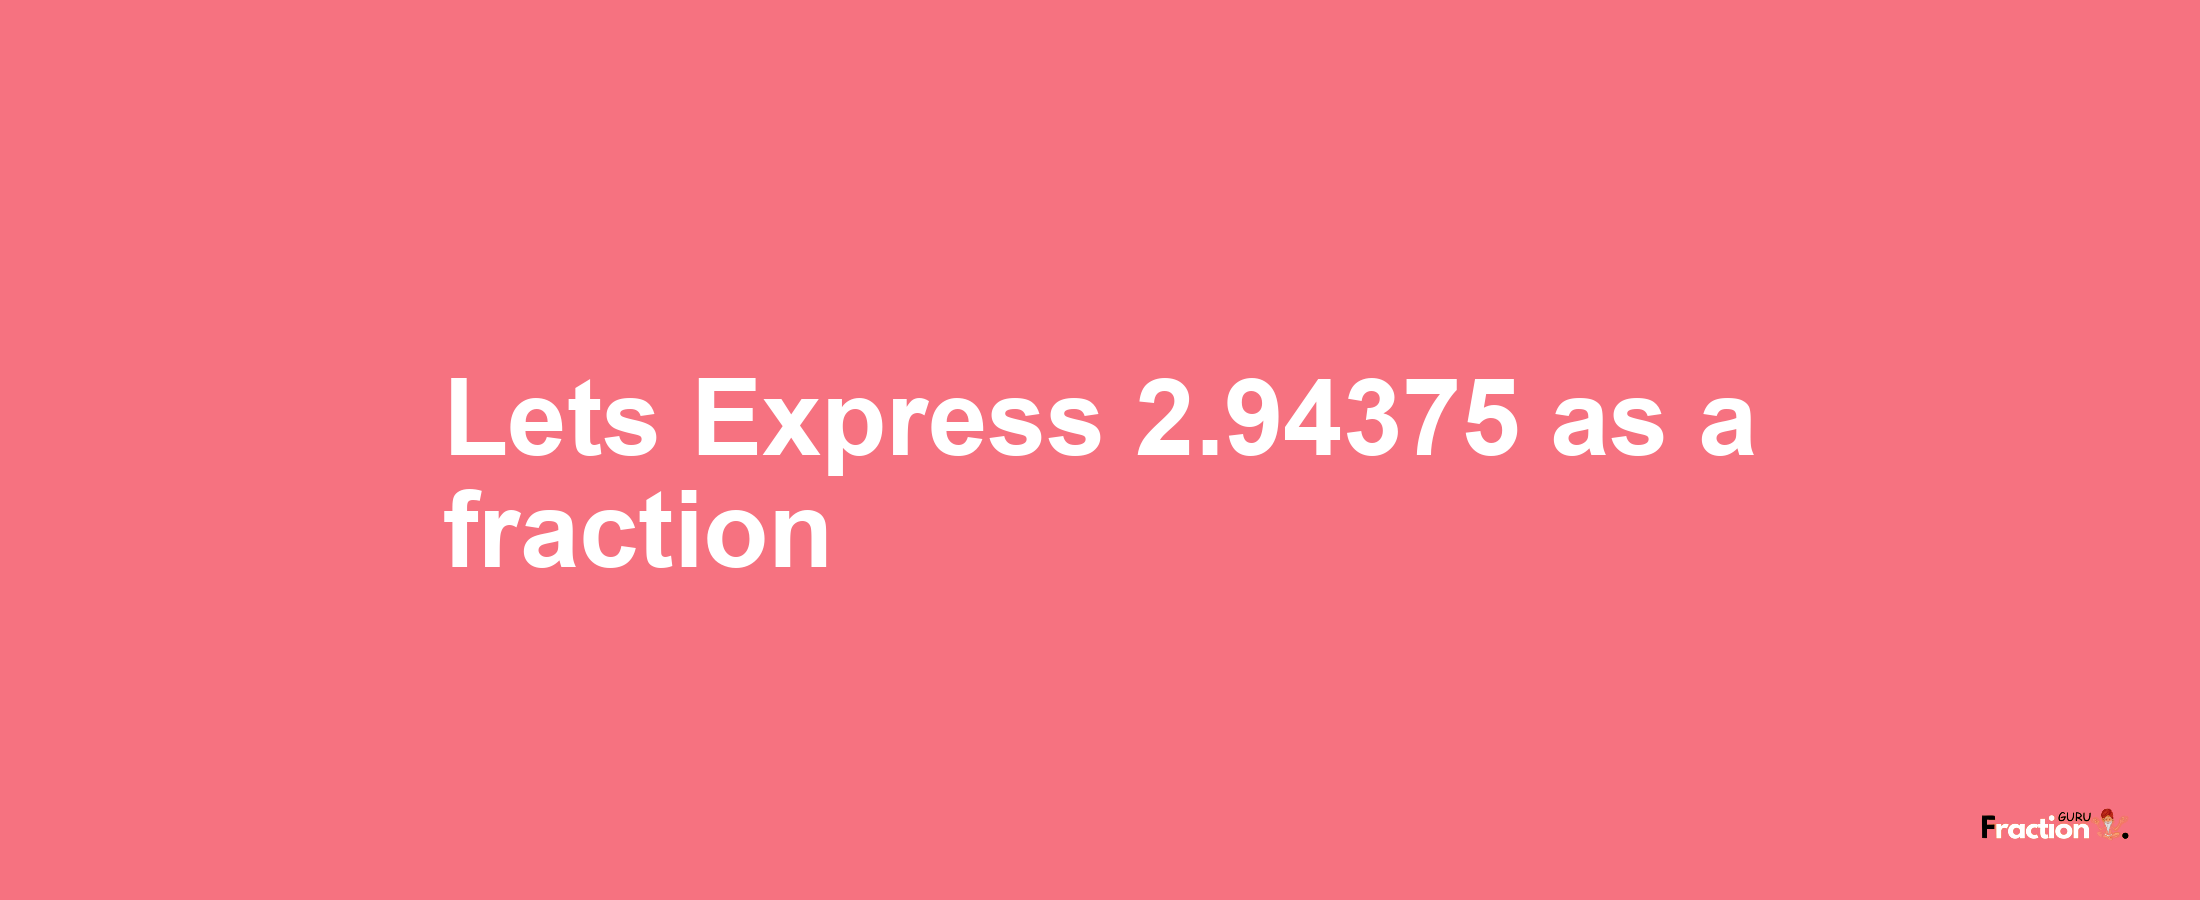 Lets Express 2.94375 as afraction